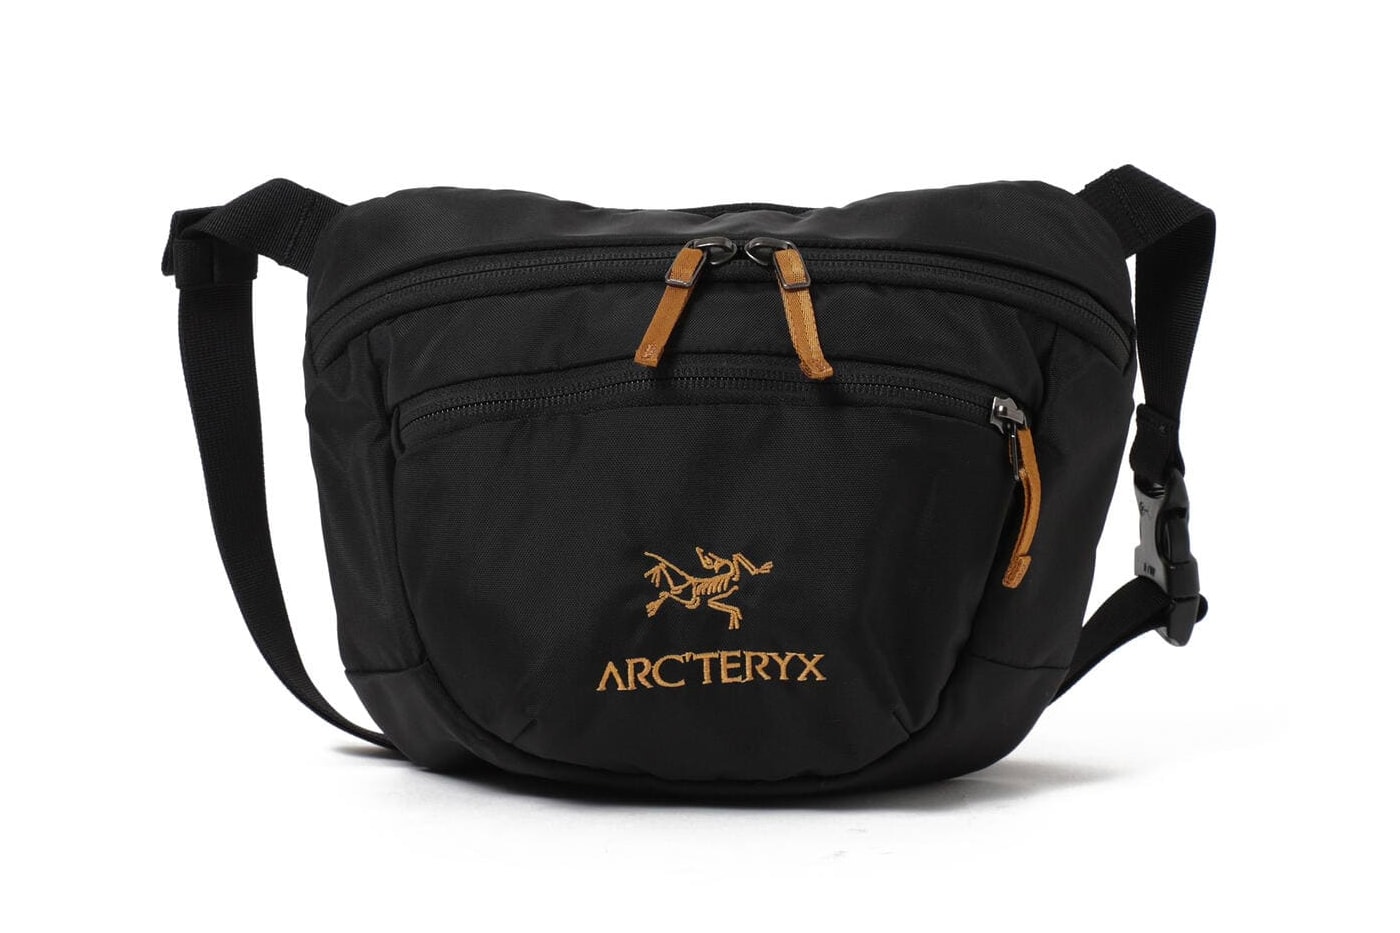 BEAMS arcteryx black and gold capsule Japan Outerwear arc'teryx outerwear jackets bags accessories 